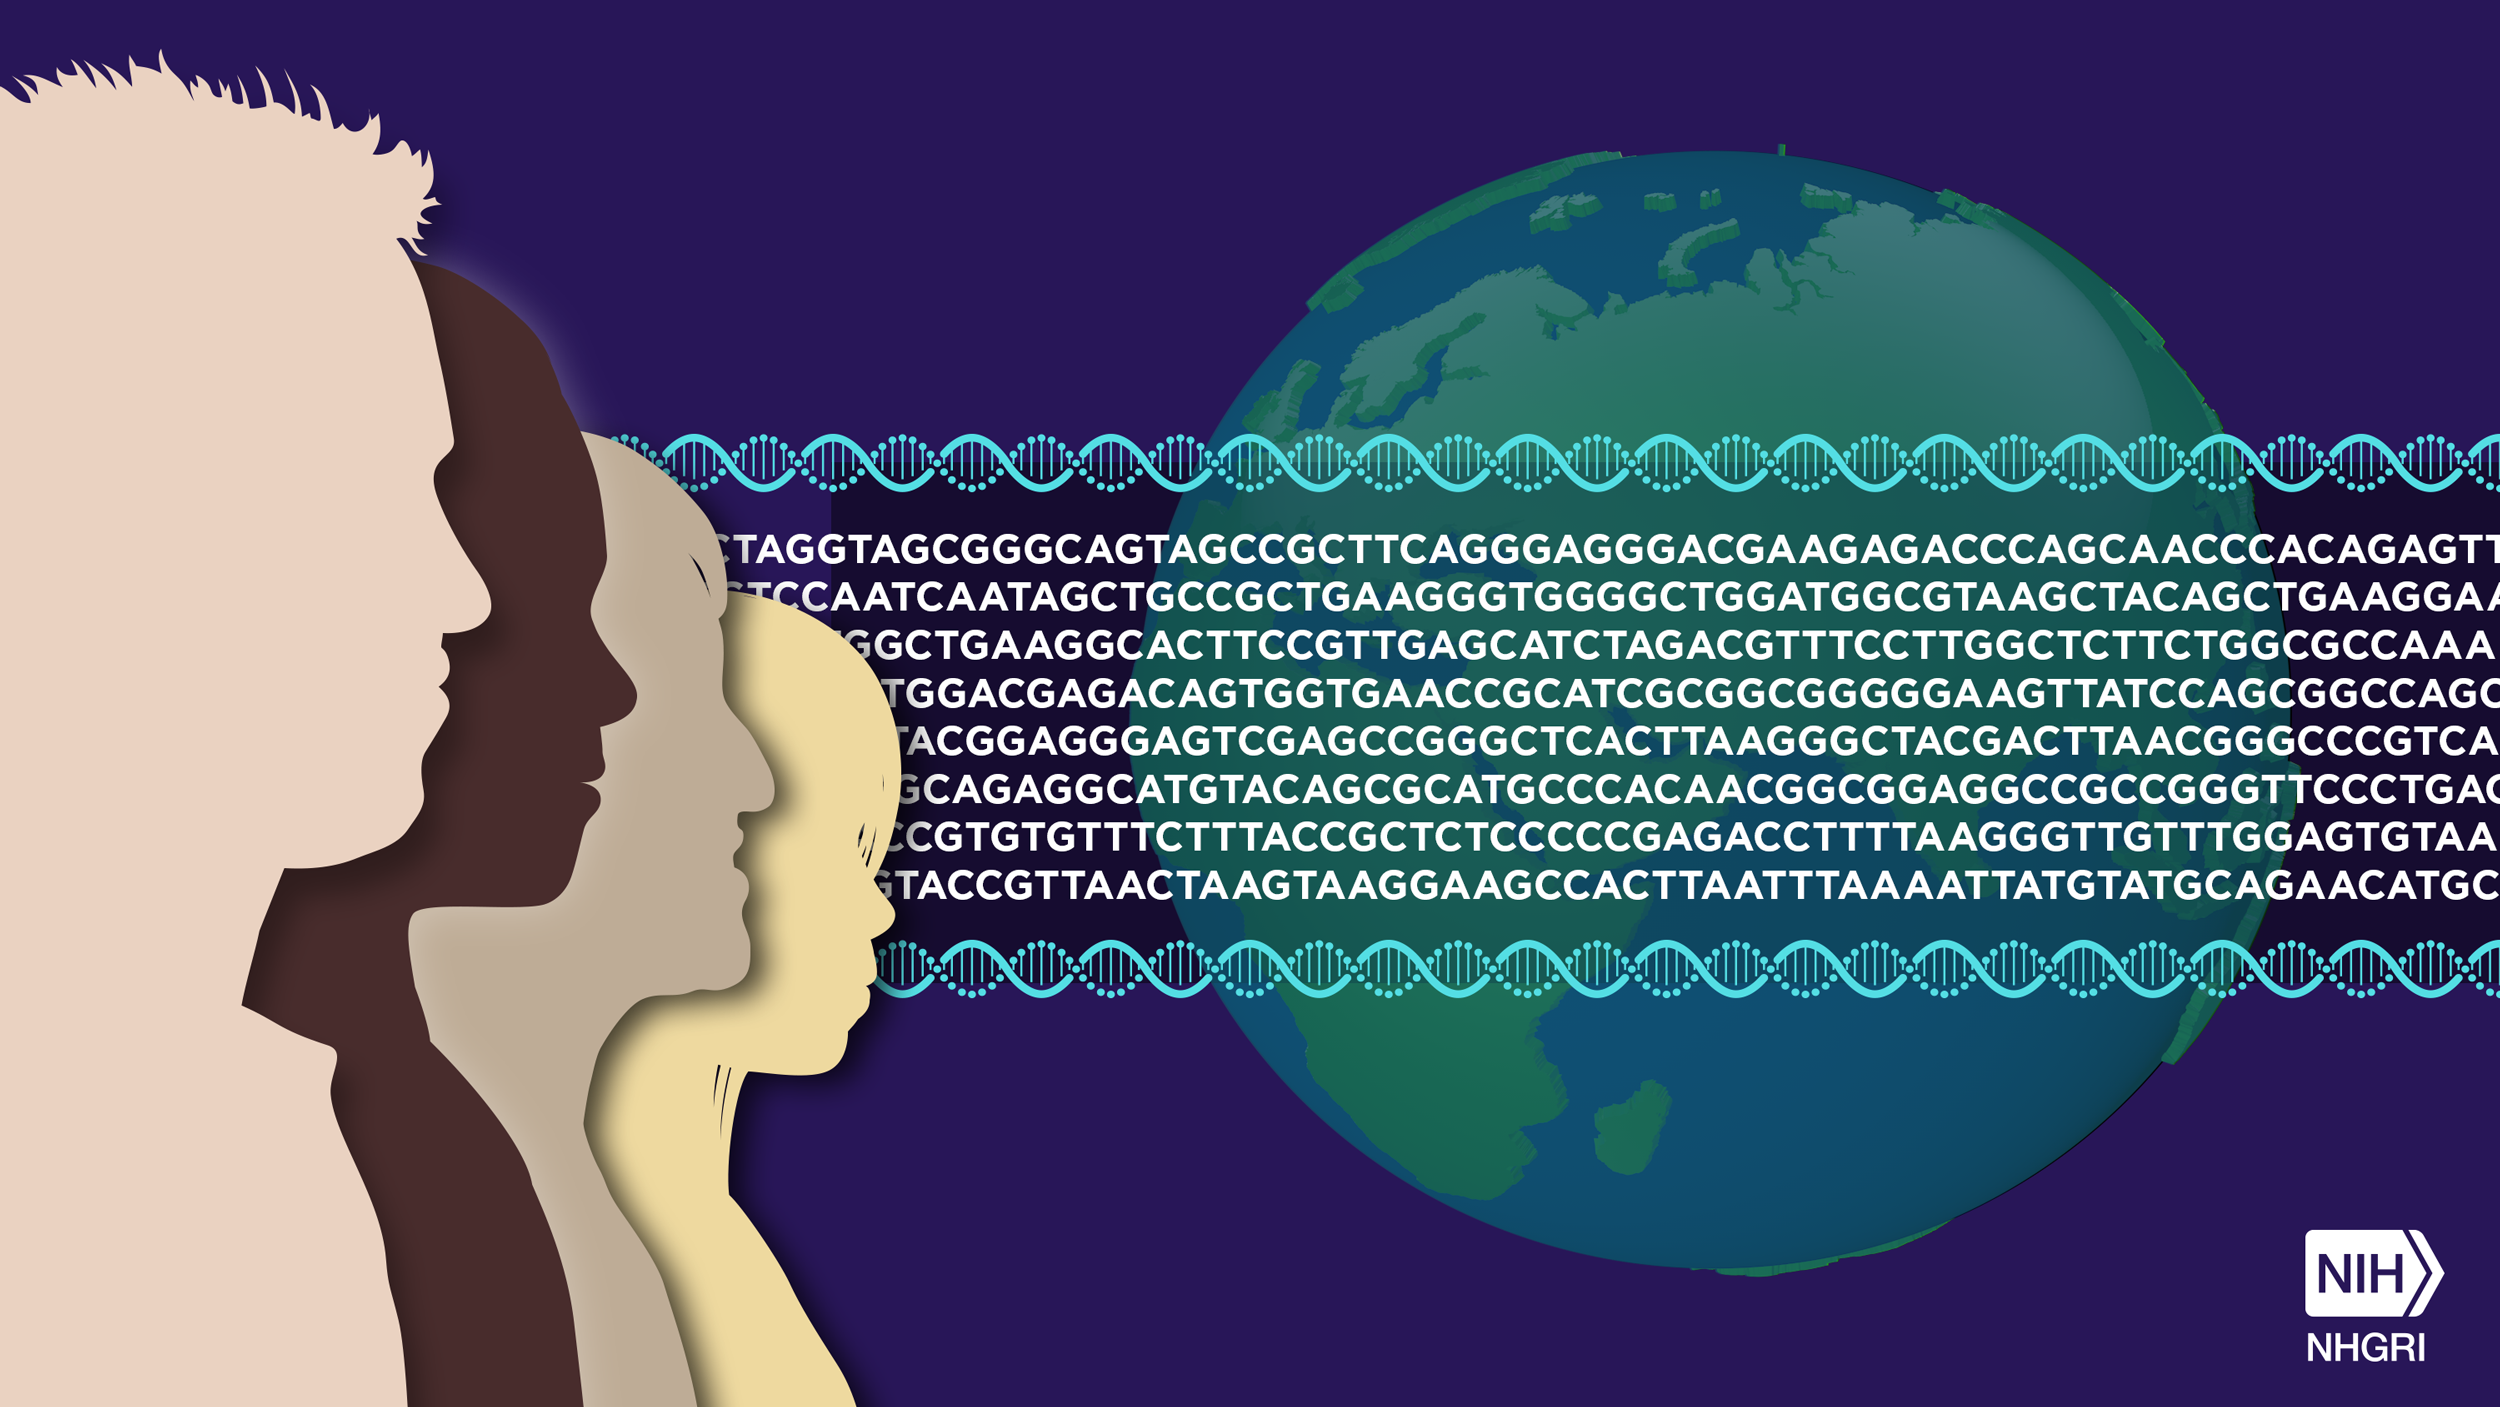 silhouettes of people in front of DNA sequences and a graphic of planet earth